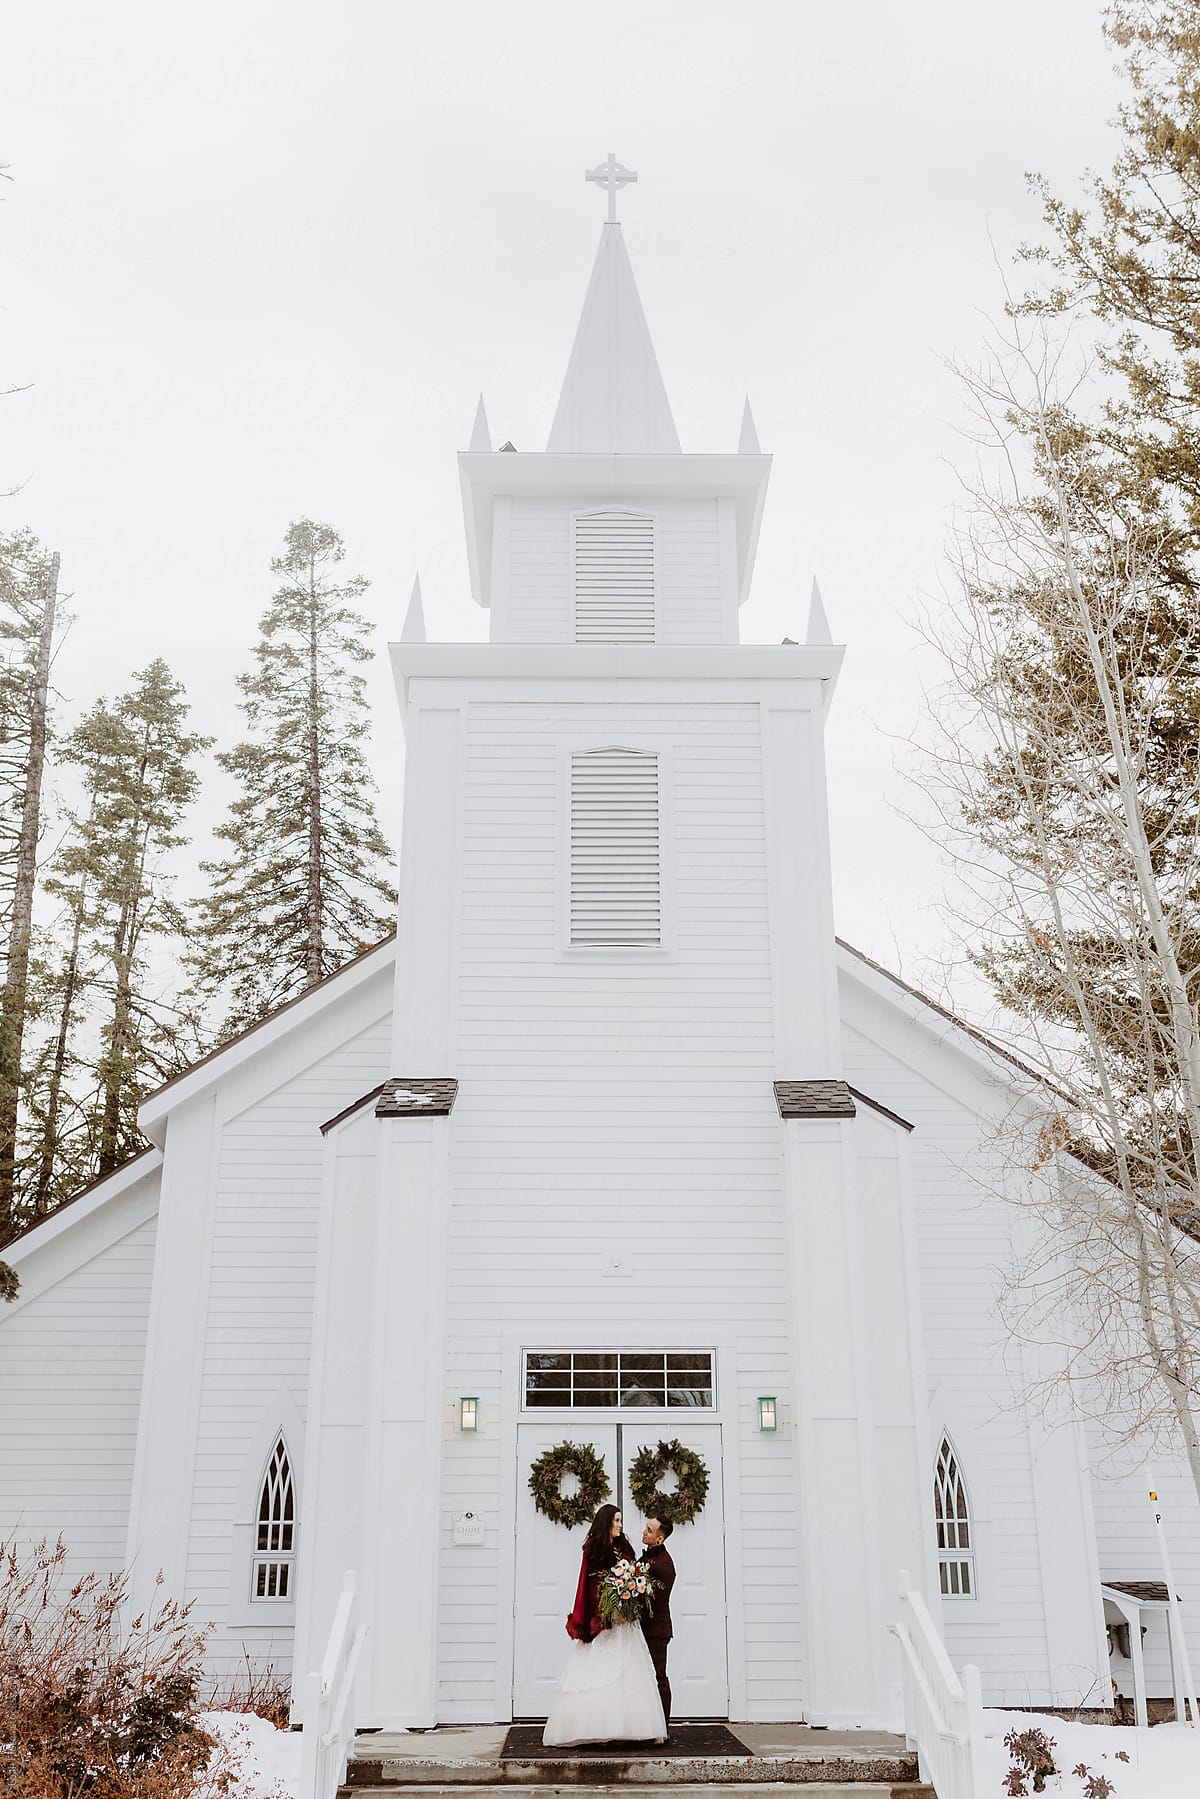 Bride and Groom Standing in front of White Chapel in Winter Landscape after Wedding Ceremony